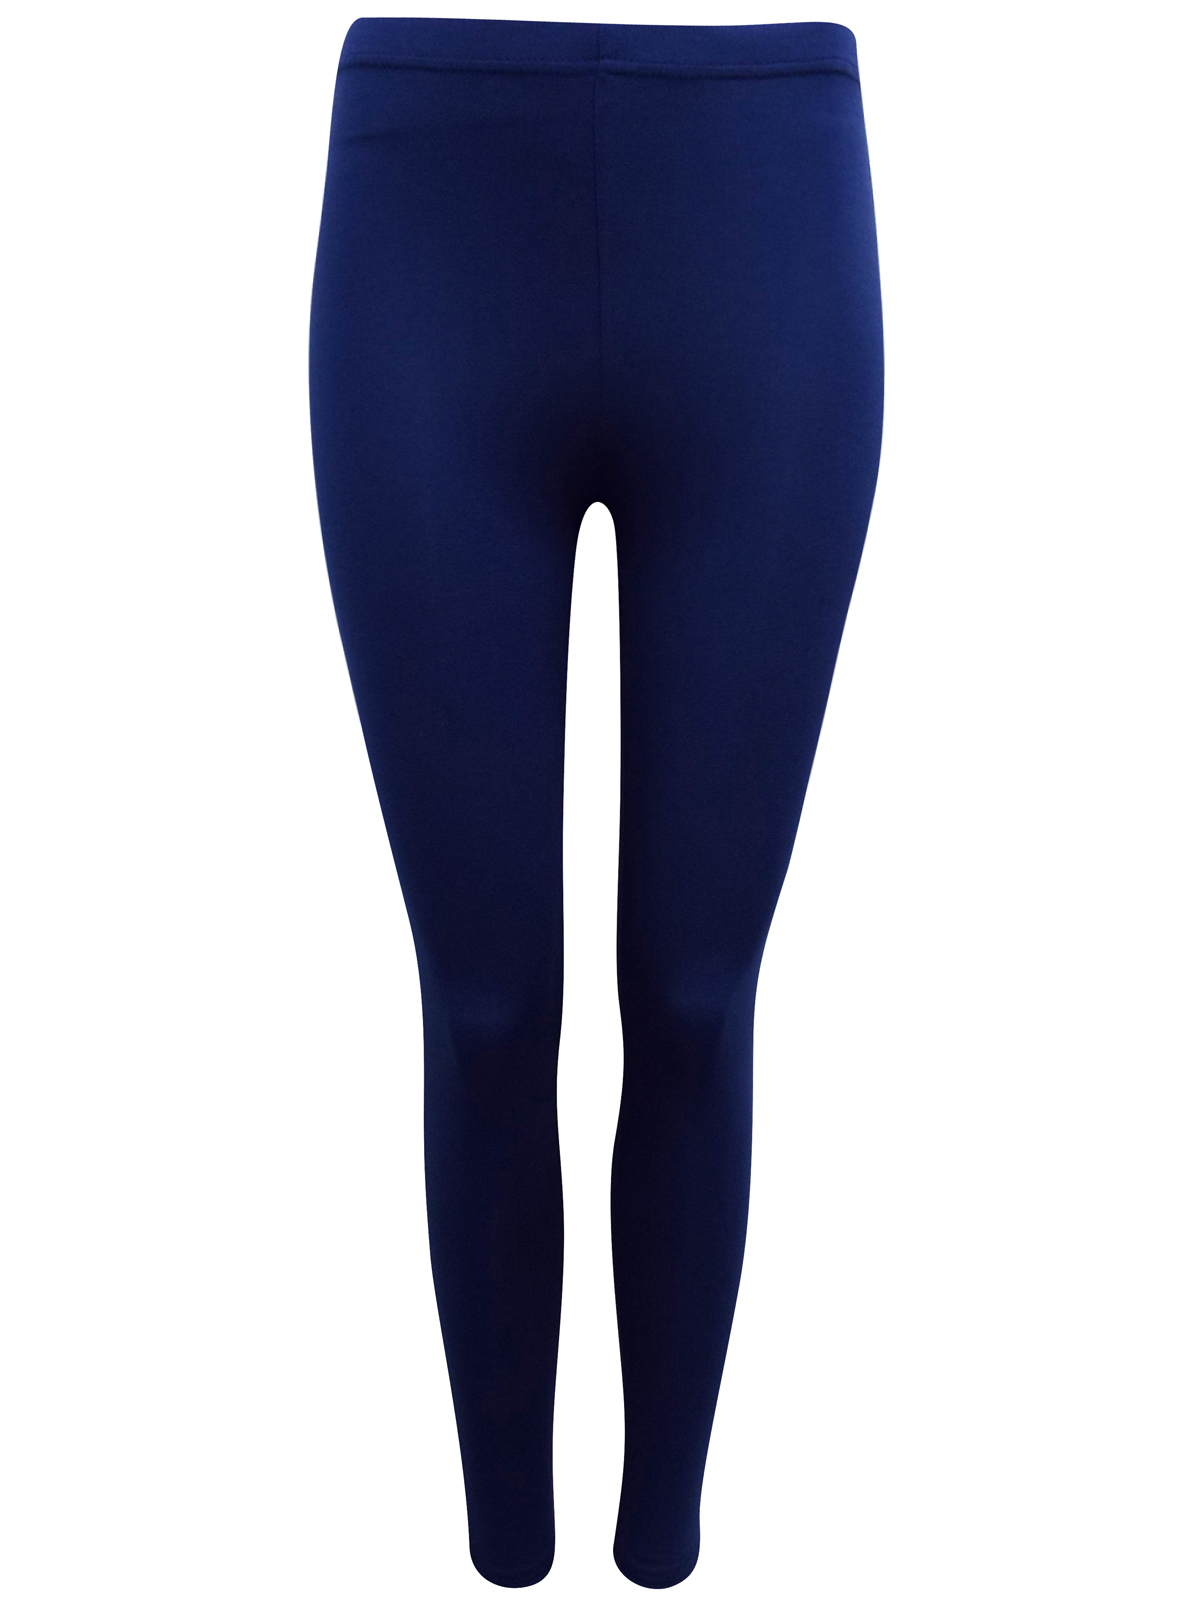 //text.. - - NAVY Stretch Jersey Full Length Leggings - Size 10 to 20